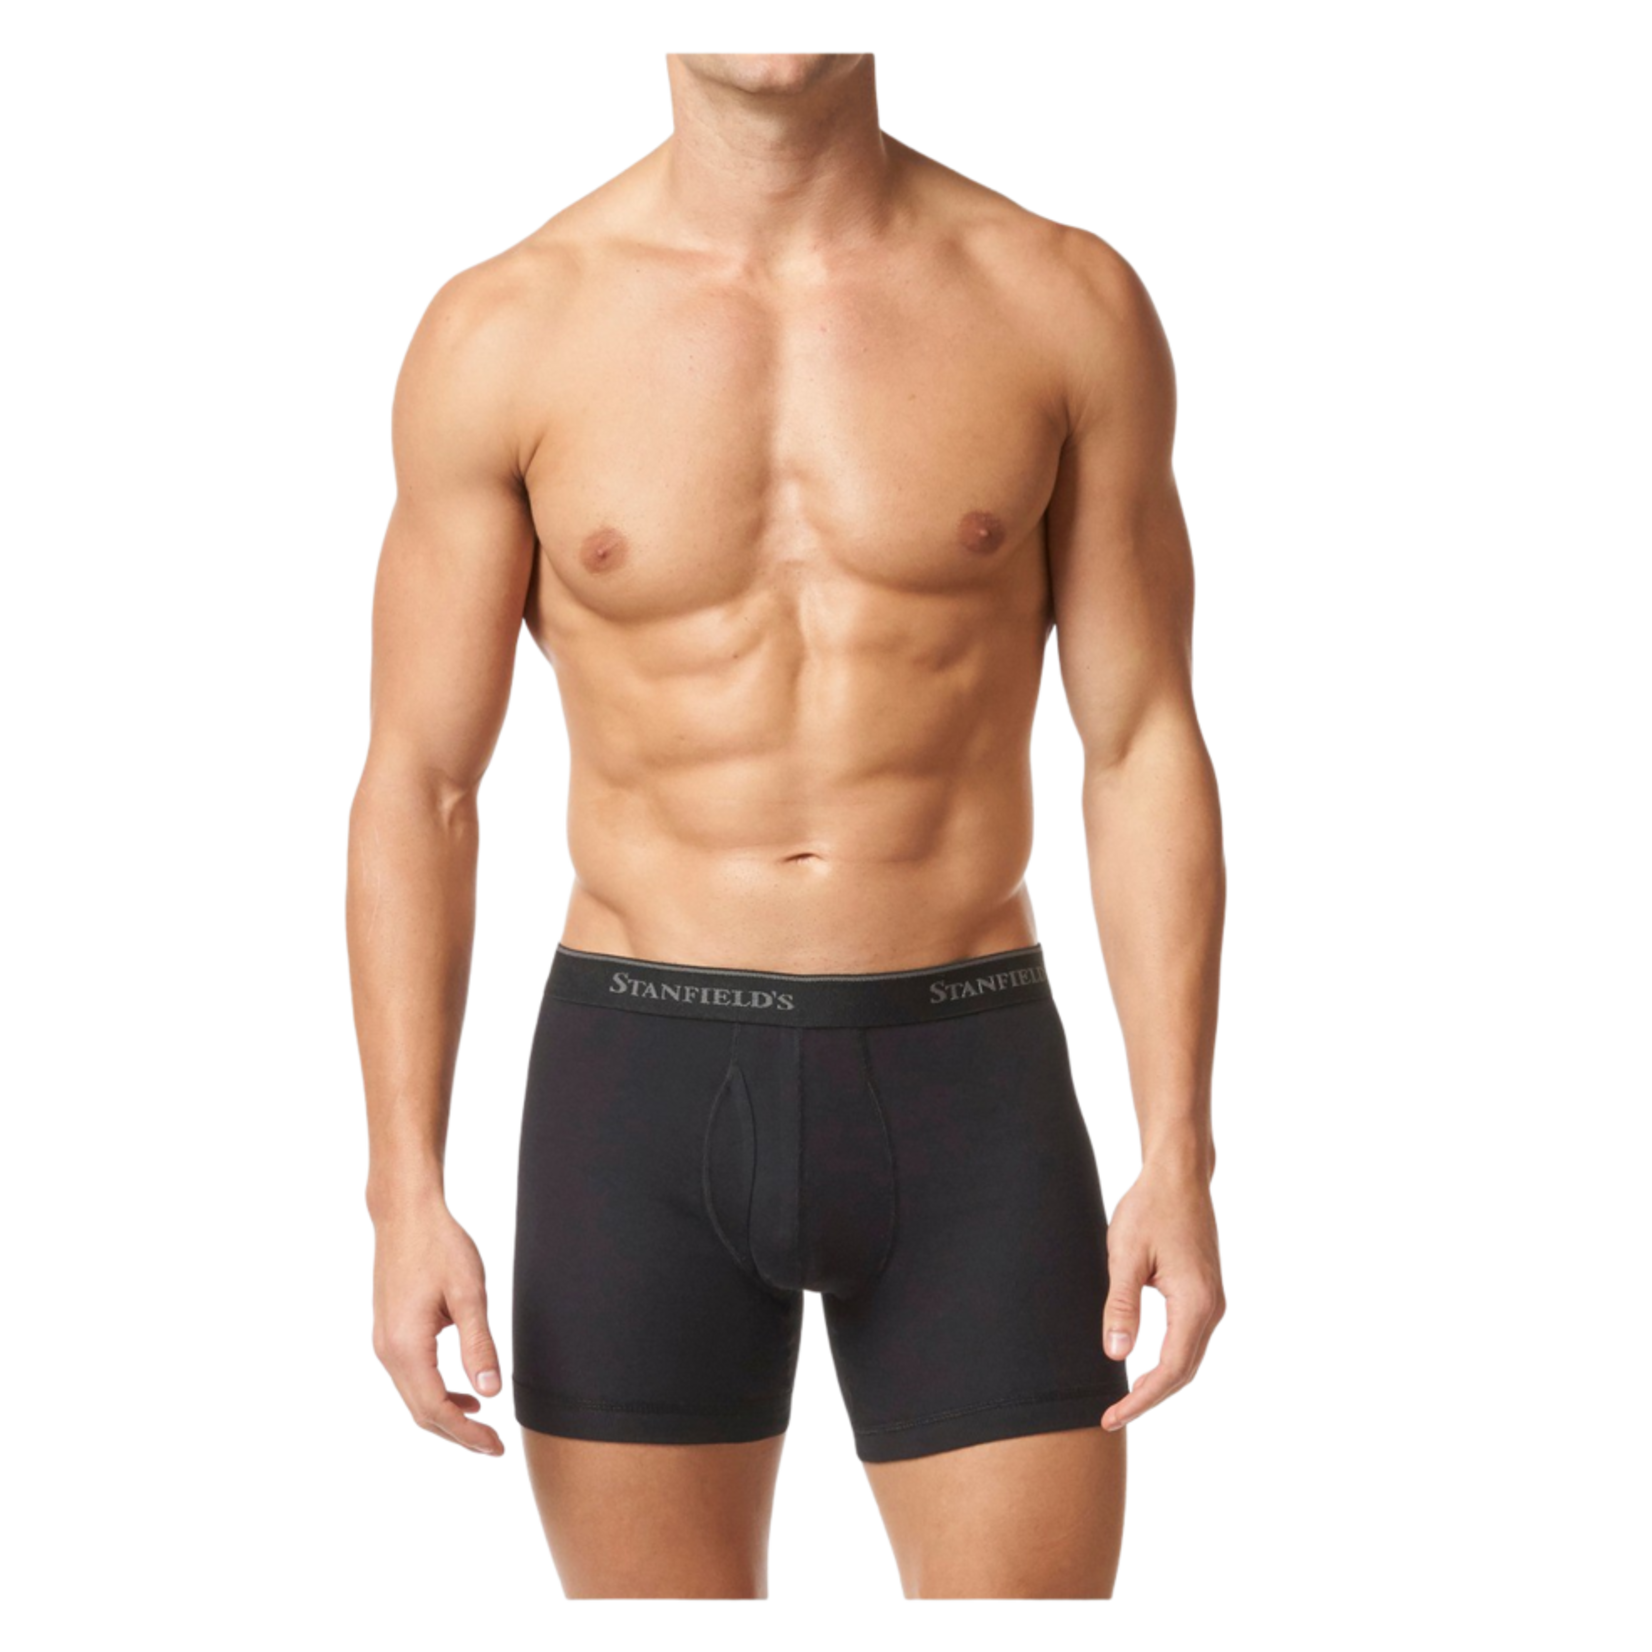 Stanfields Stanfield's 2510 2-Pack Boxer Briefs